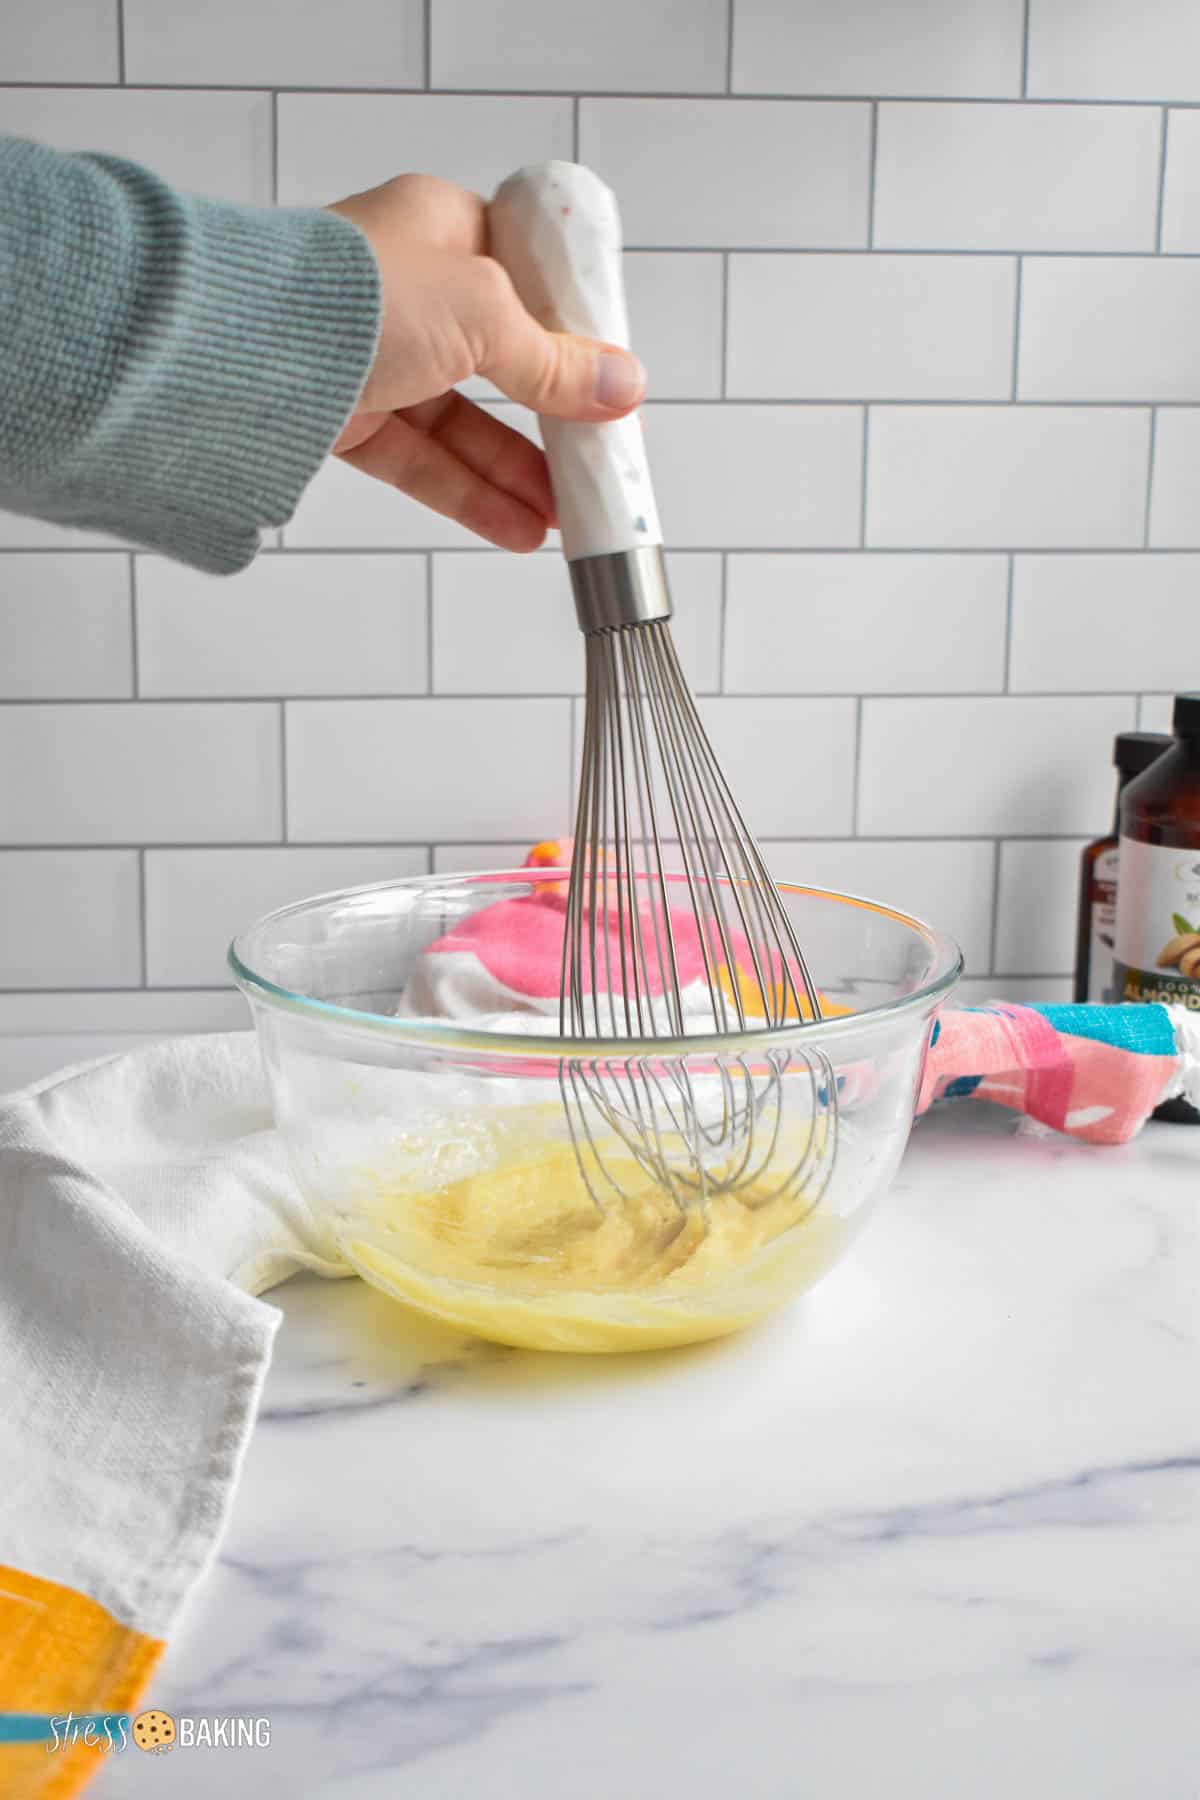 Whisking a yellow batter in a glass mixing bowl